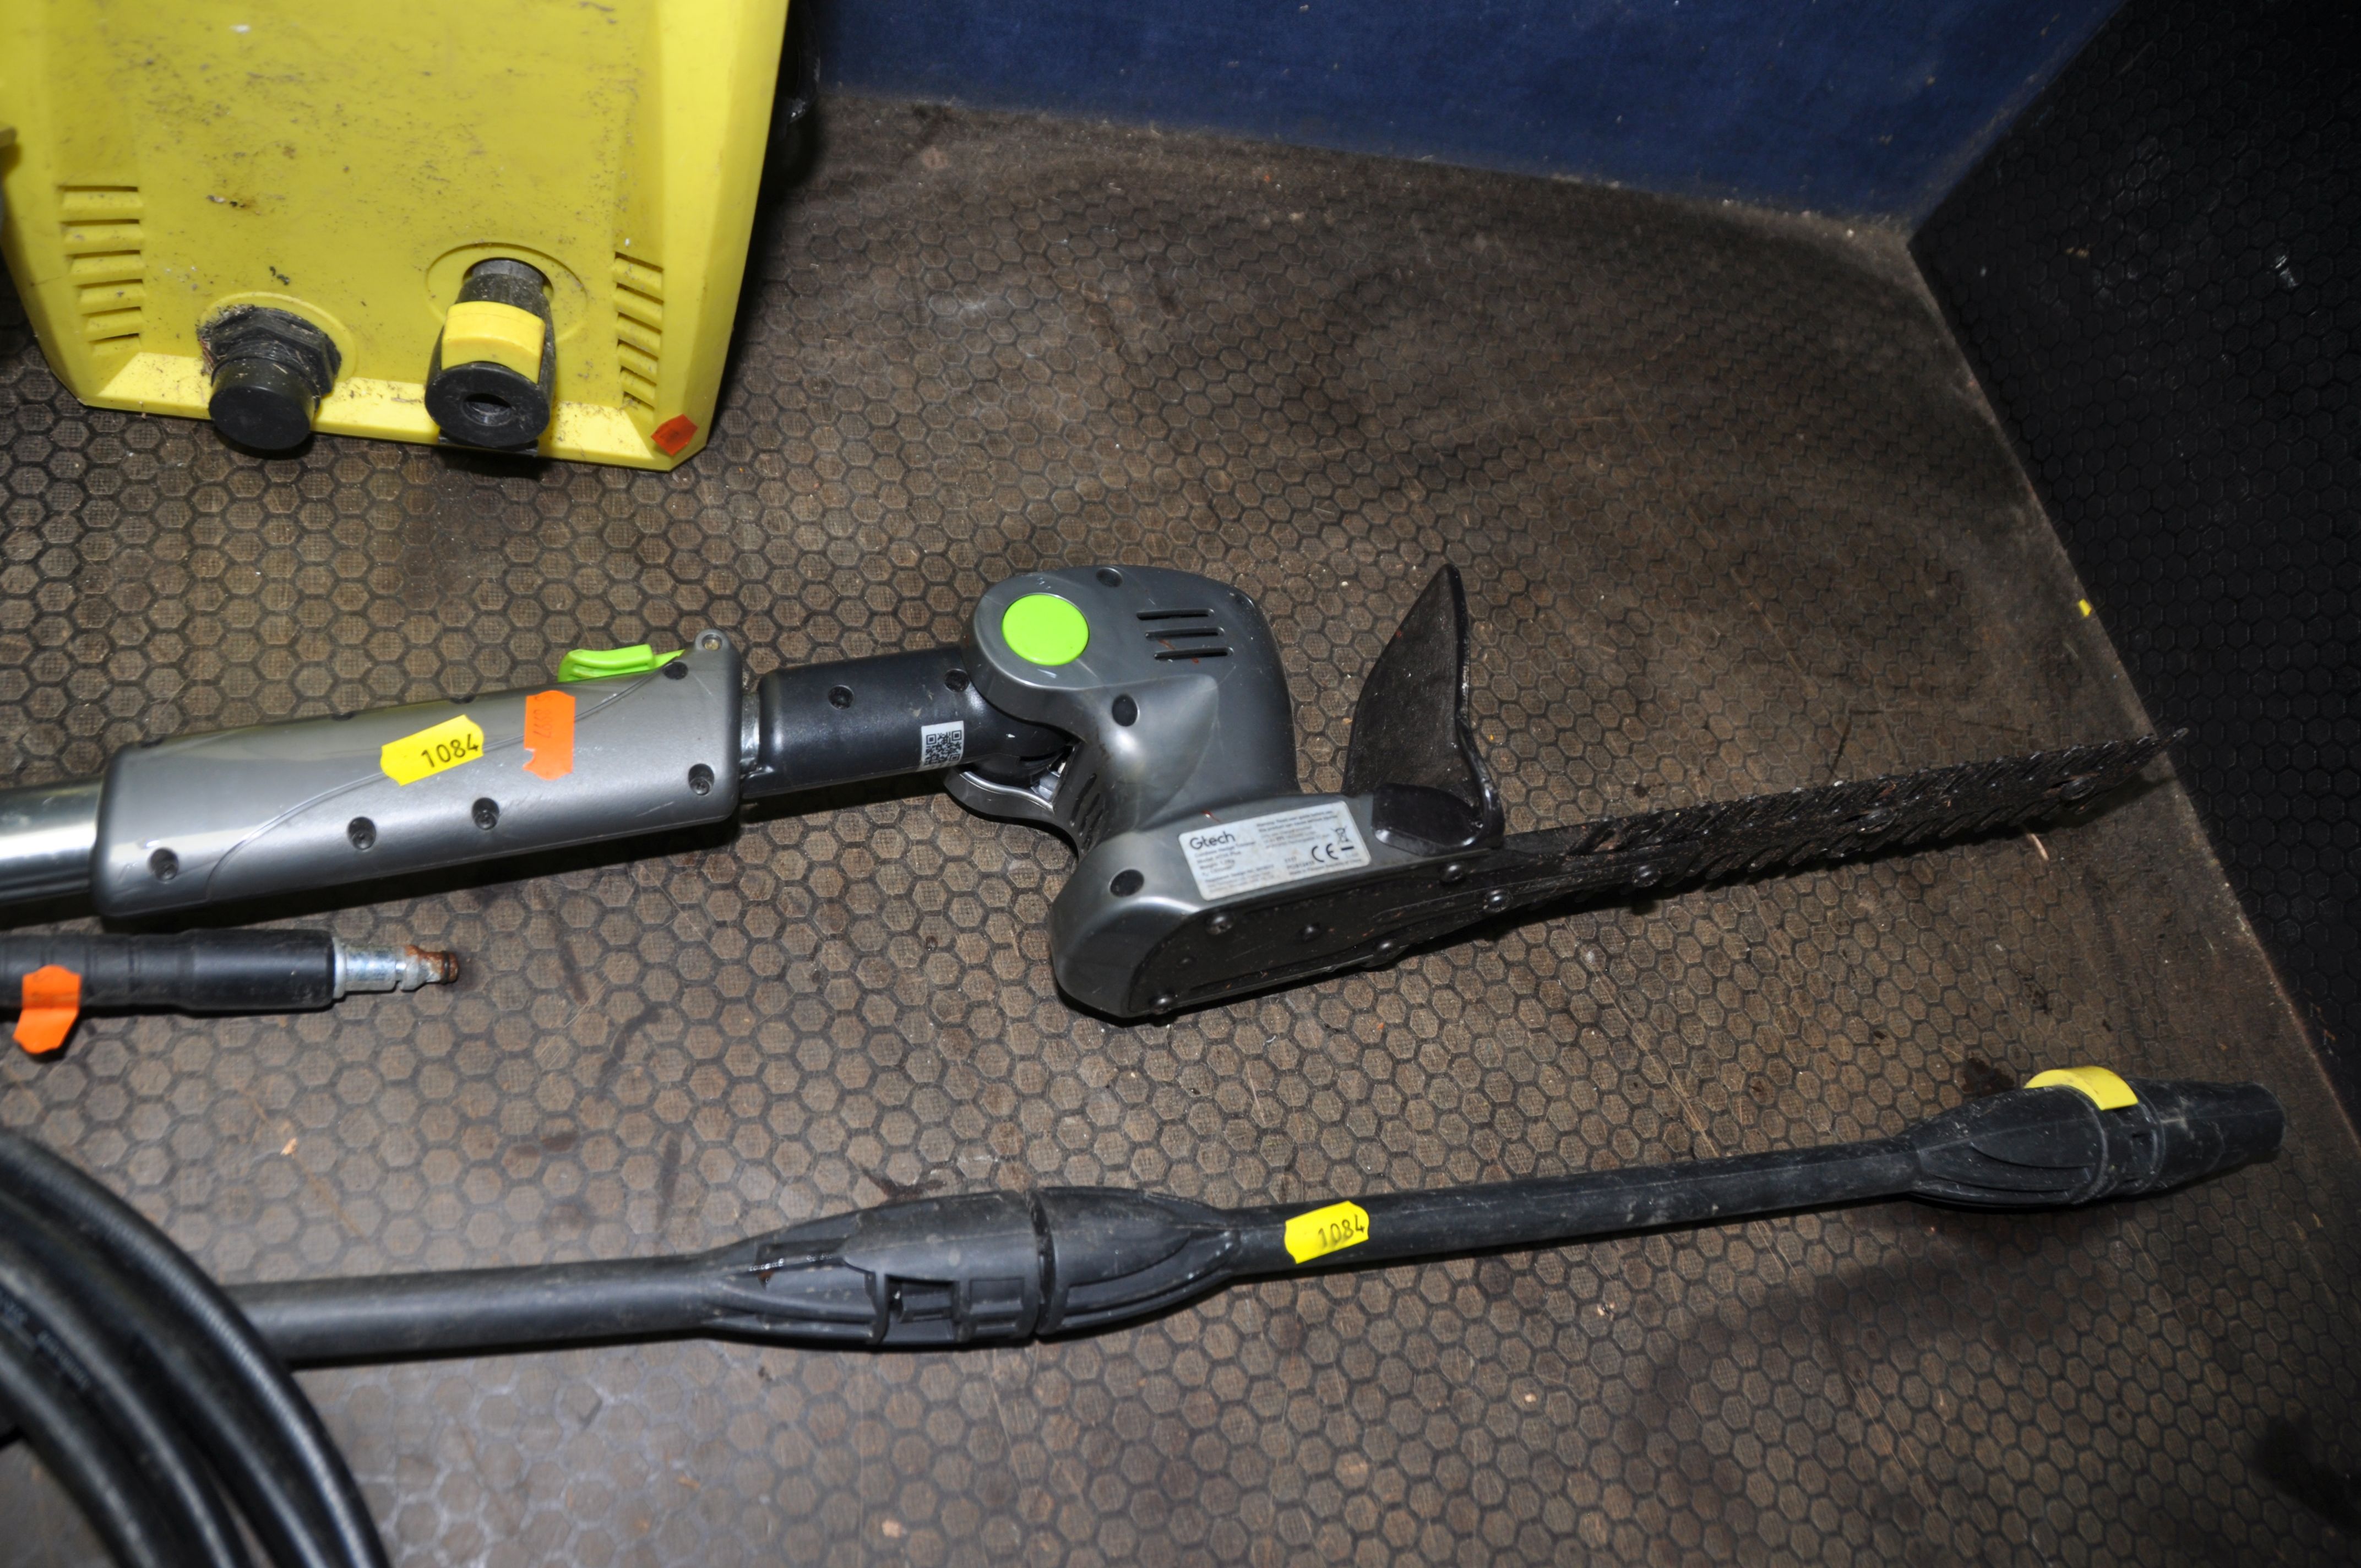 A G TECH HT05PLUS CORDLESS HEDGE TRIMMER and a Vytronix jet wash with lance and hose pipe (both - Image 4 of 5